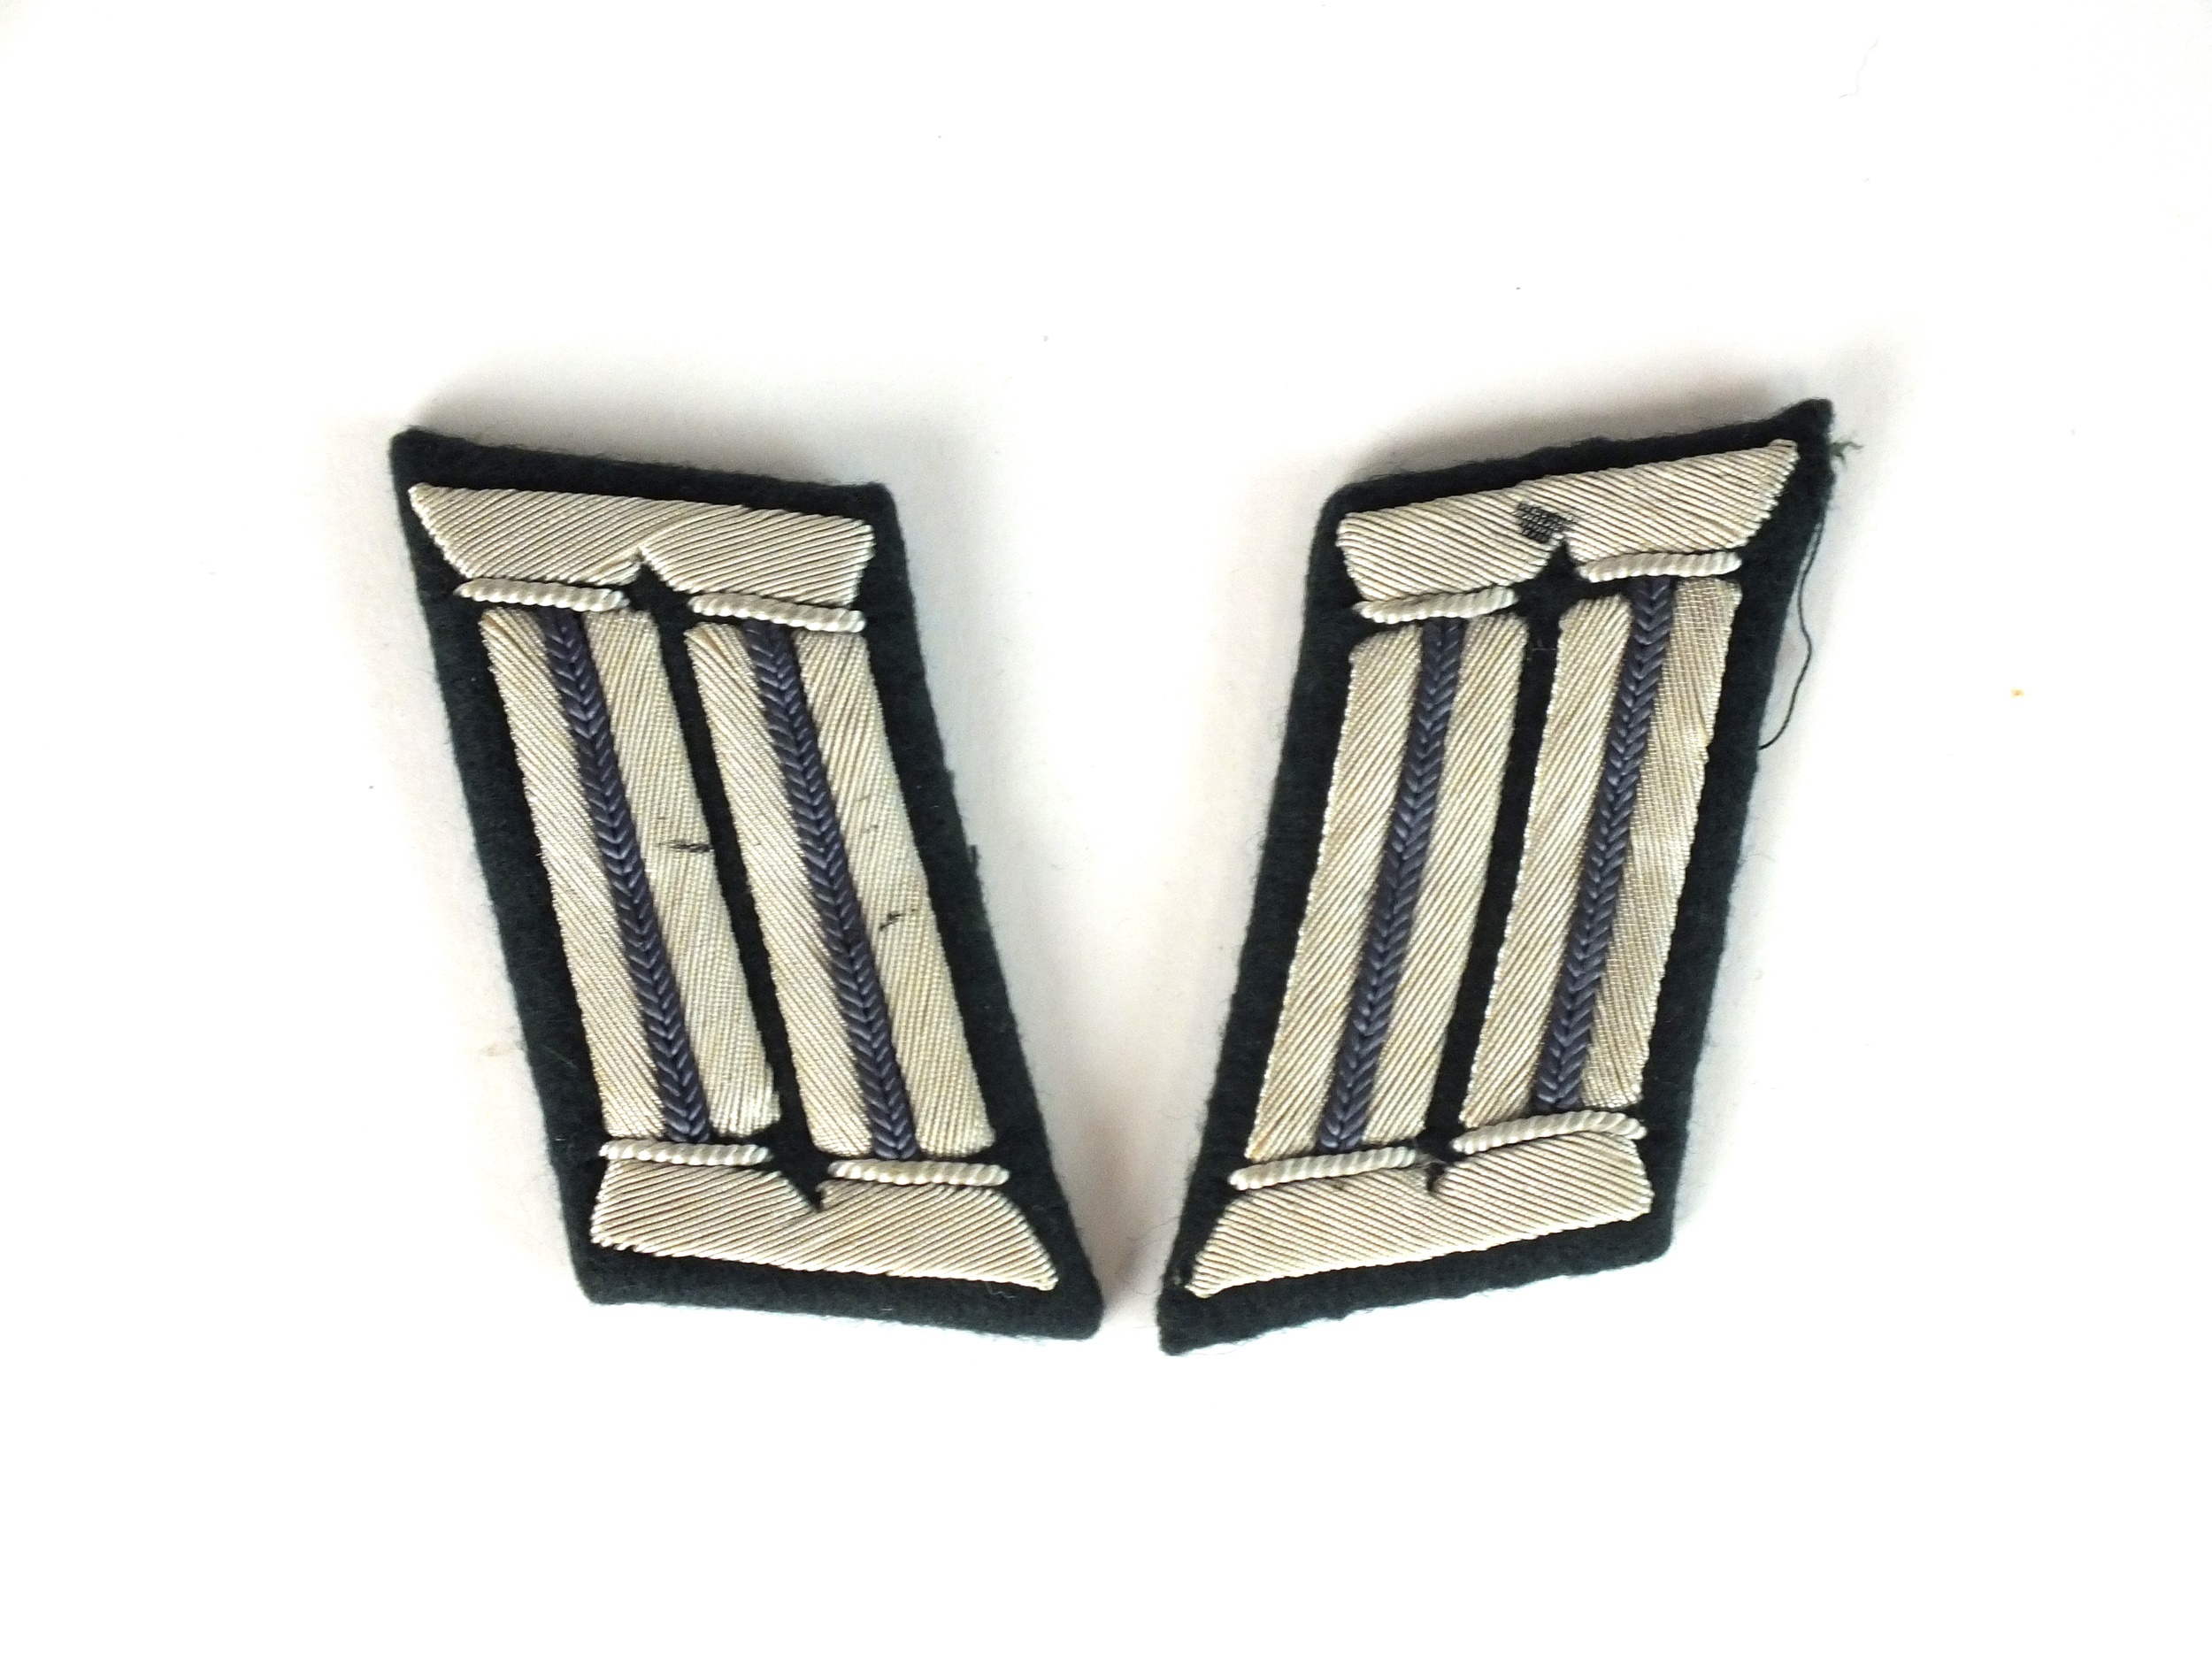 A pair of German Third Reich Heer TSD (military automobile service) officer's collar tabs with